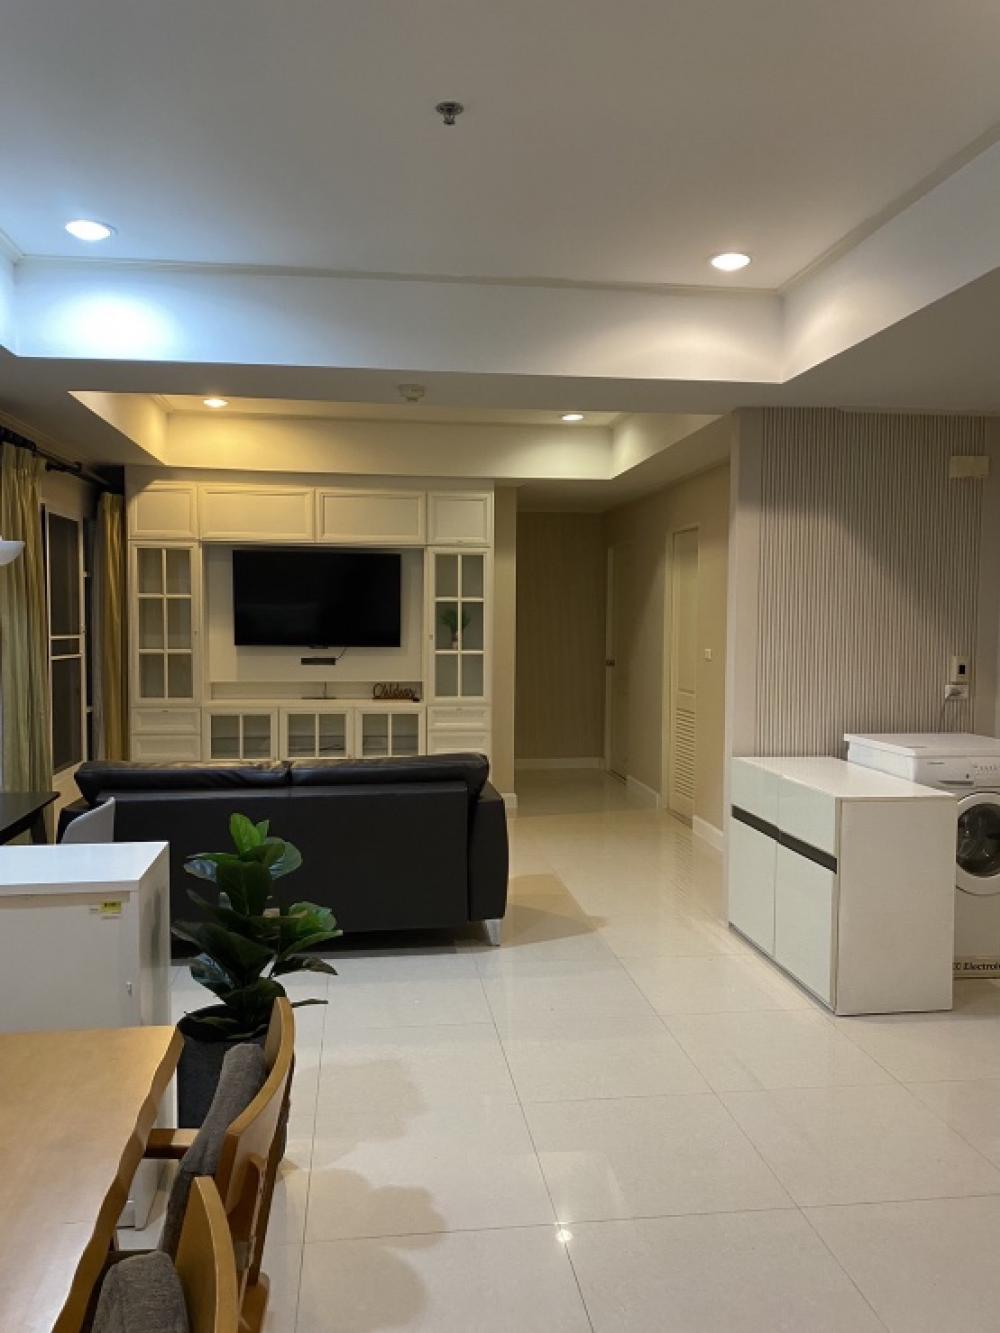 For RentCondoSukhumvit, Asoke, Thonglor : Condo for rent, size 85 sq m, spacious room, fully furnished, ready to move in, large kitchen, quiet condo, safe, not crowded.